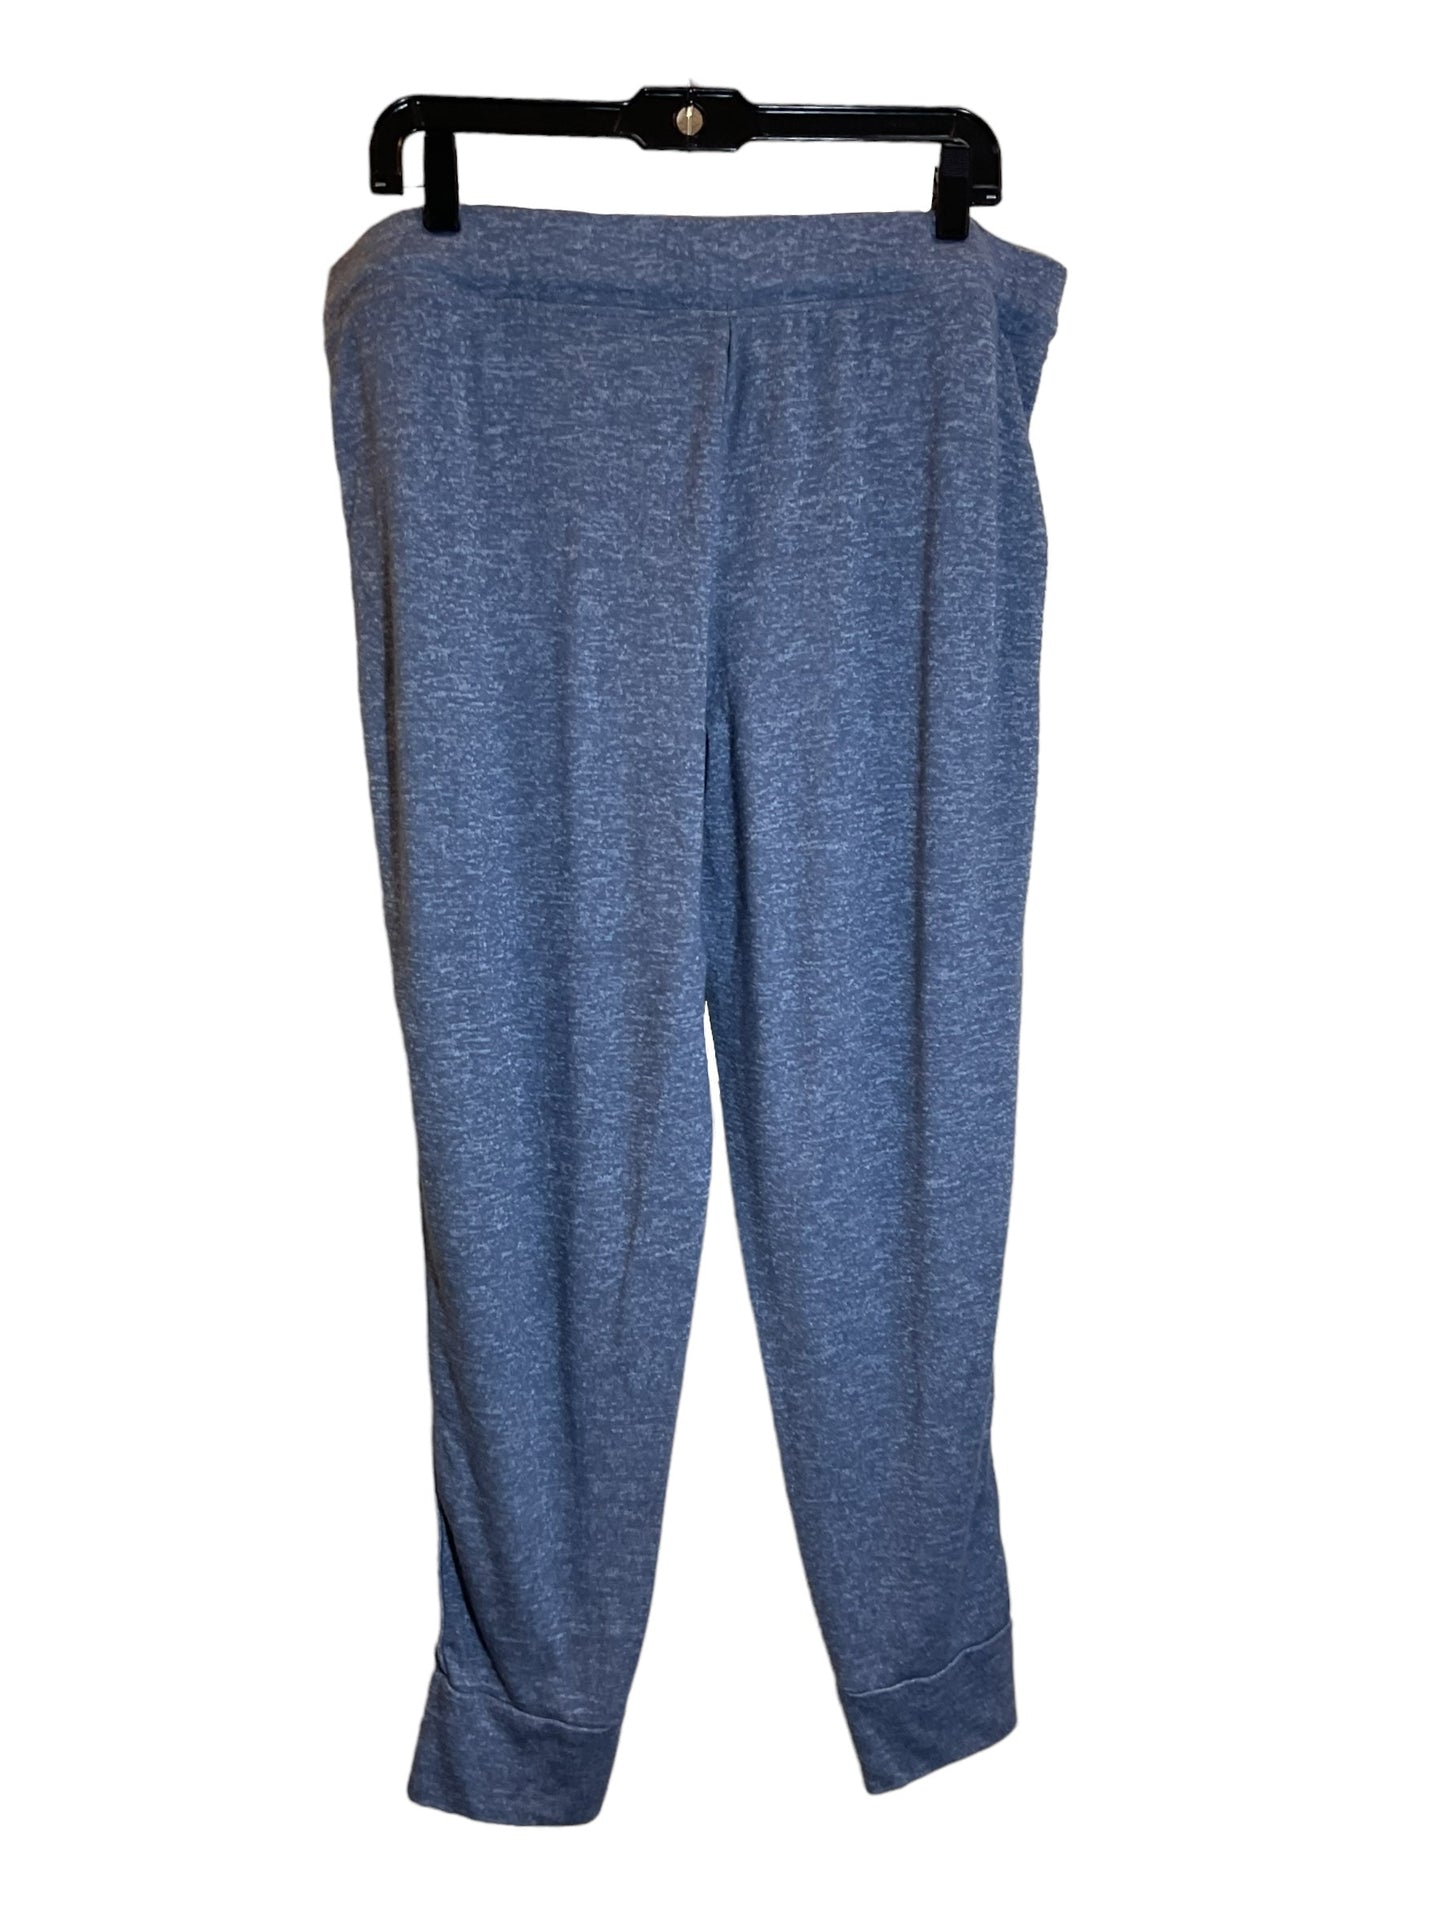 Athletic Pants By Ugg  Size: Xl